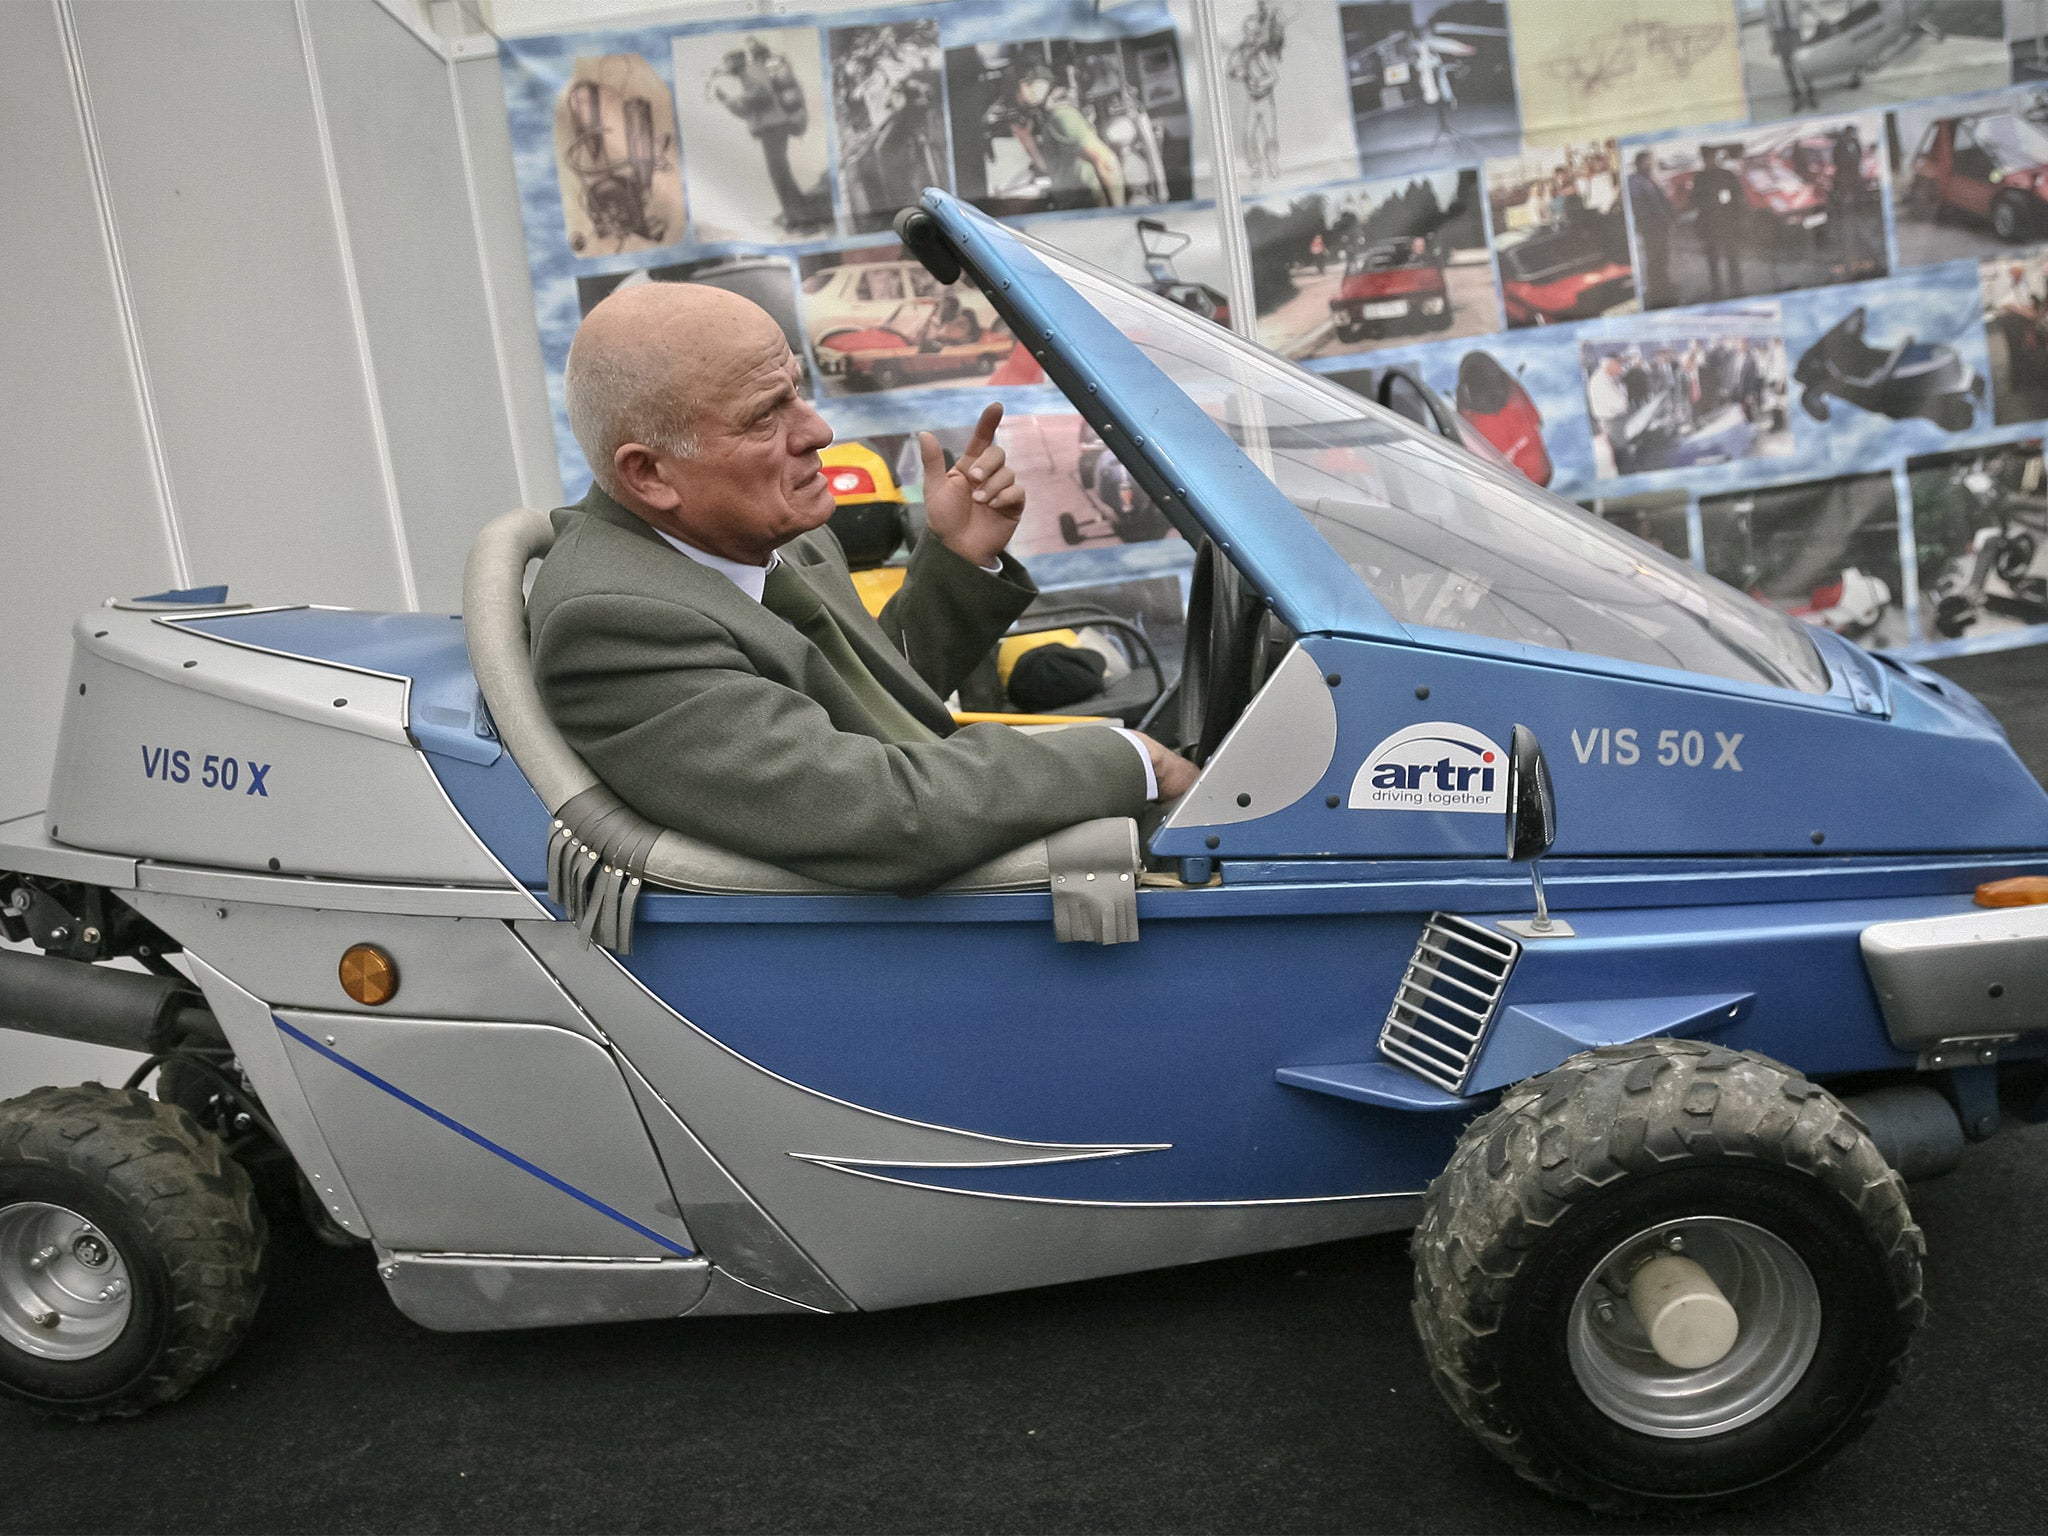 Capra in 2009 in another of his inventions, a fuel-efficient car